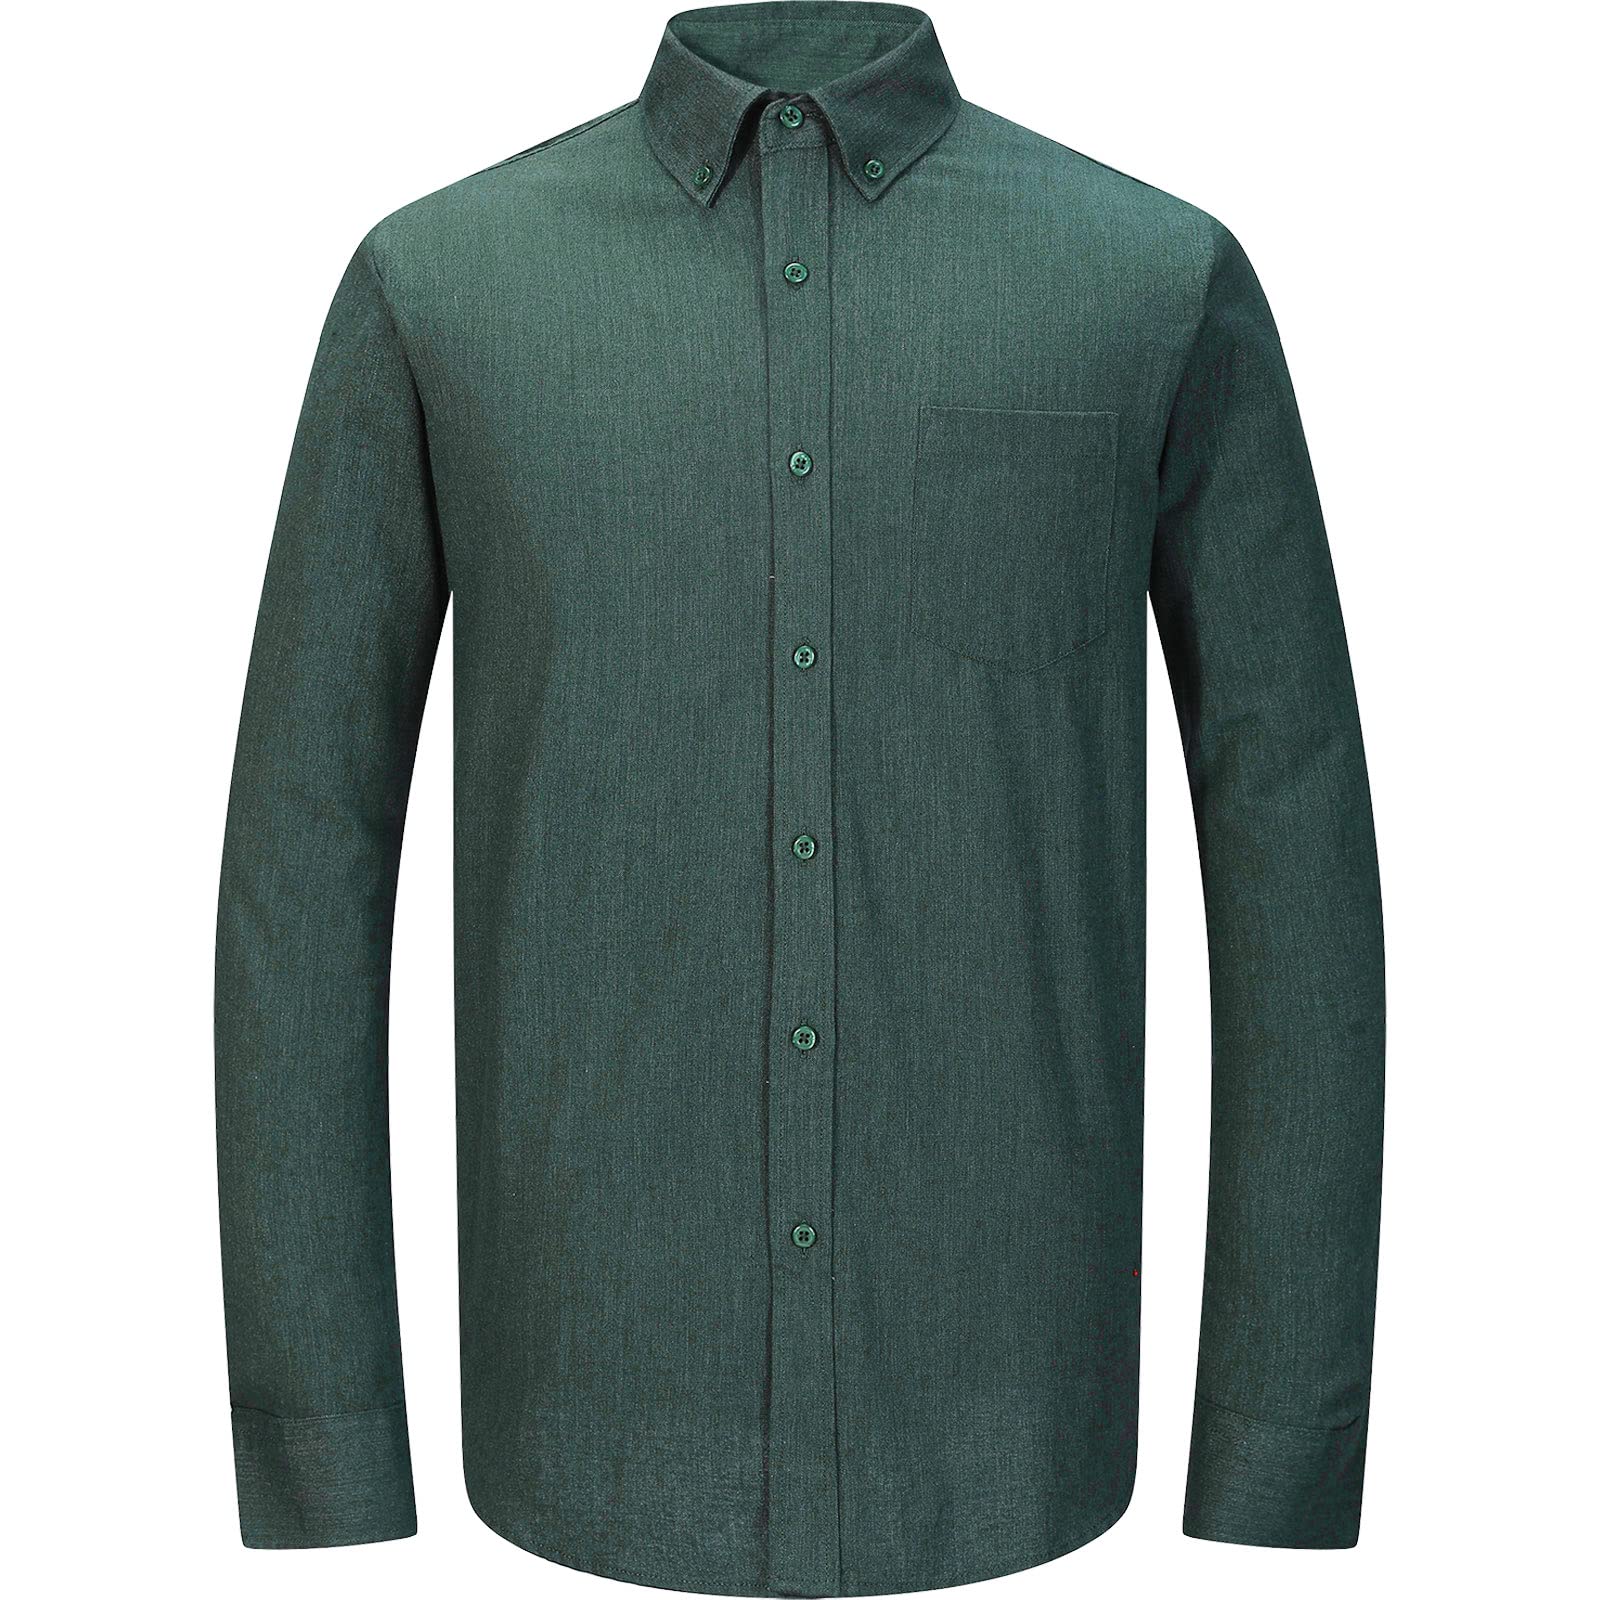 MGWDT Men's Dress Shirts Long Sleeve Oxford Button Down Shirt Classic-Fit Cotton Blouse Wrinkle Resistant Duck Green L 35